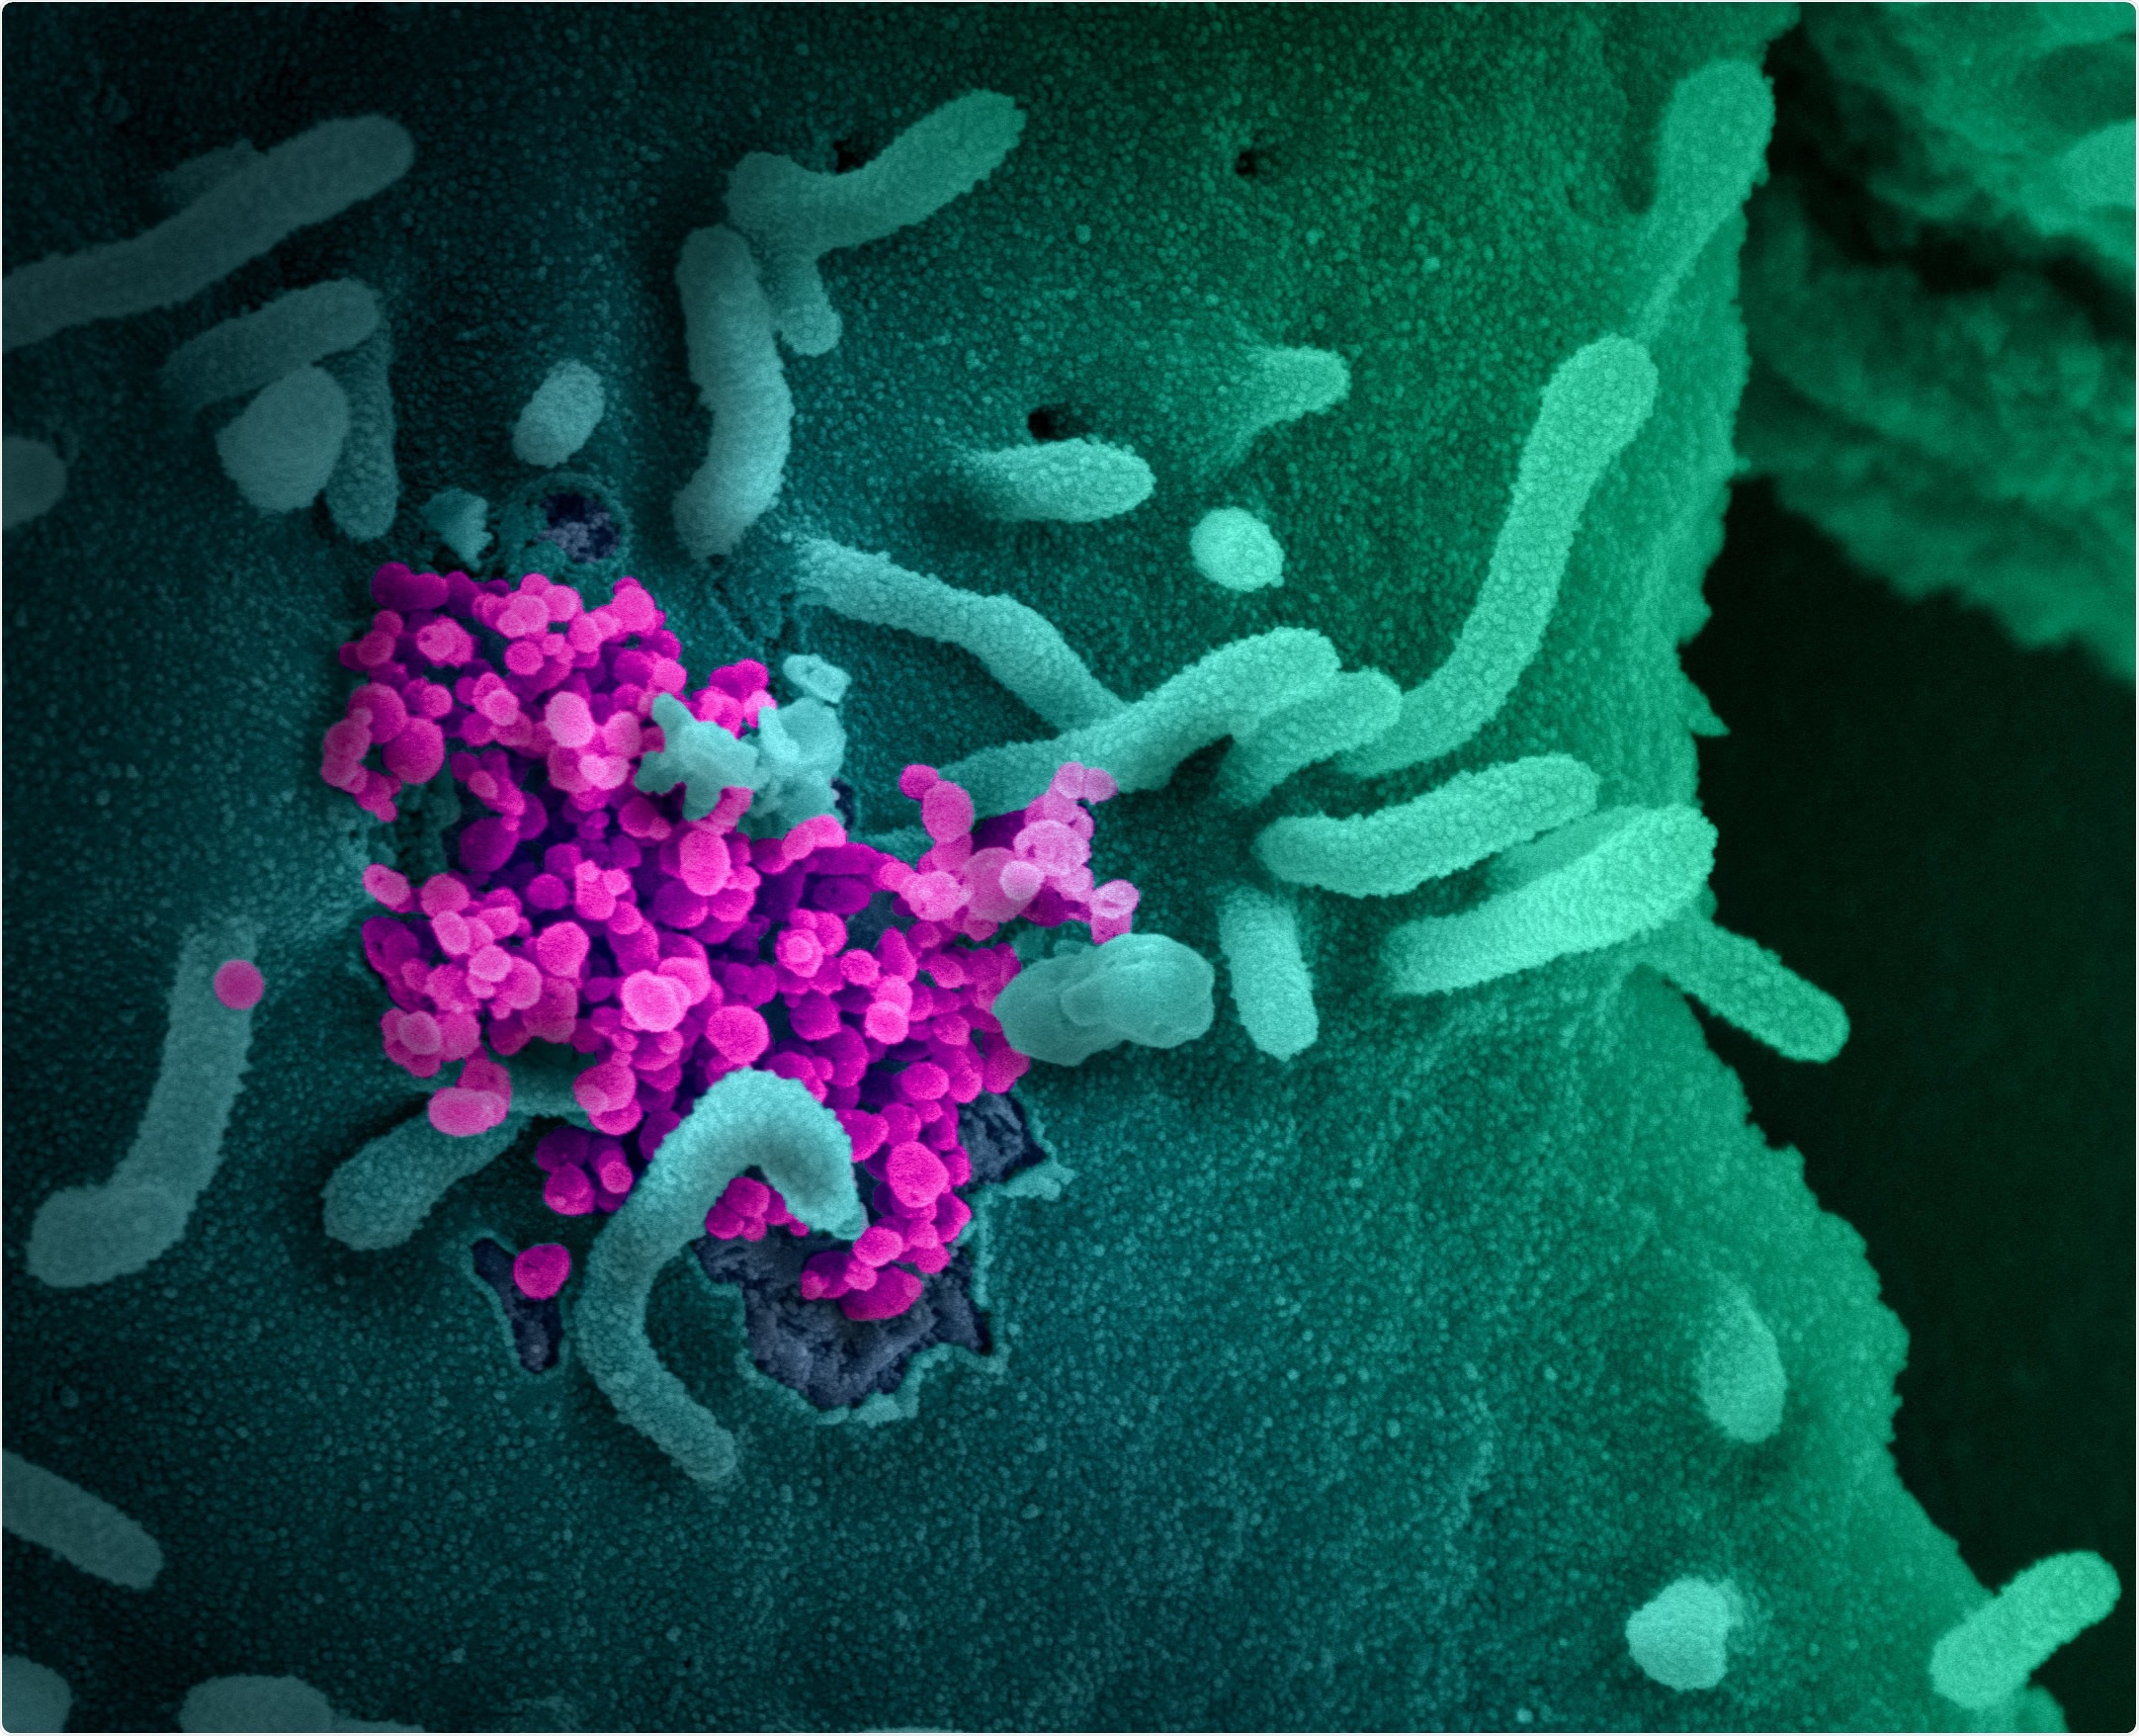 This scanning electron microscope image shows SARS-CoV-2 (round magenta objects) emerging from the surface of cells cultured in the lab. SARS-CoV-2, also known as 2019-nCoV, is the virus that causes COVID-19. The virus shown was isolated from a patient in the U.S. Image captured and colorized at NIAID